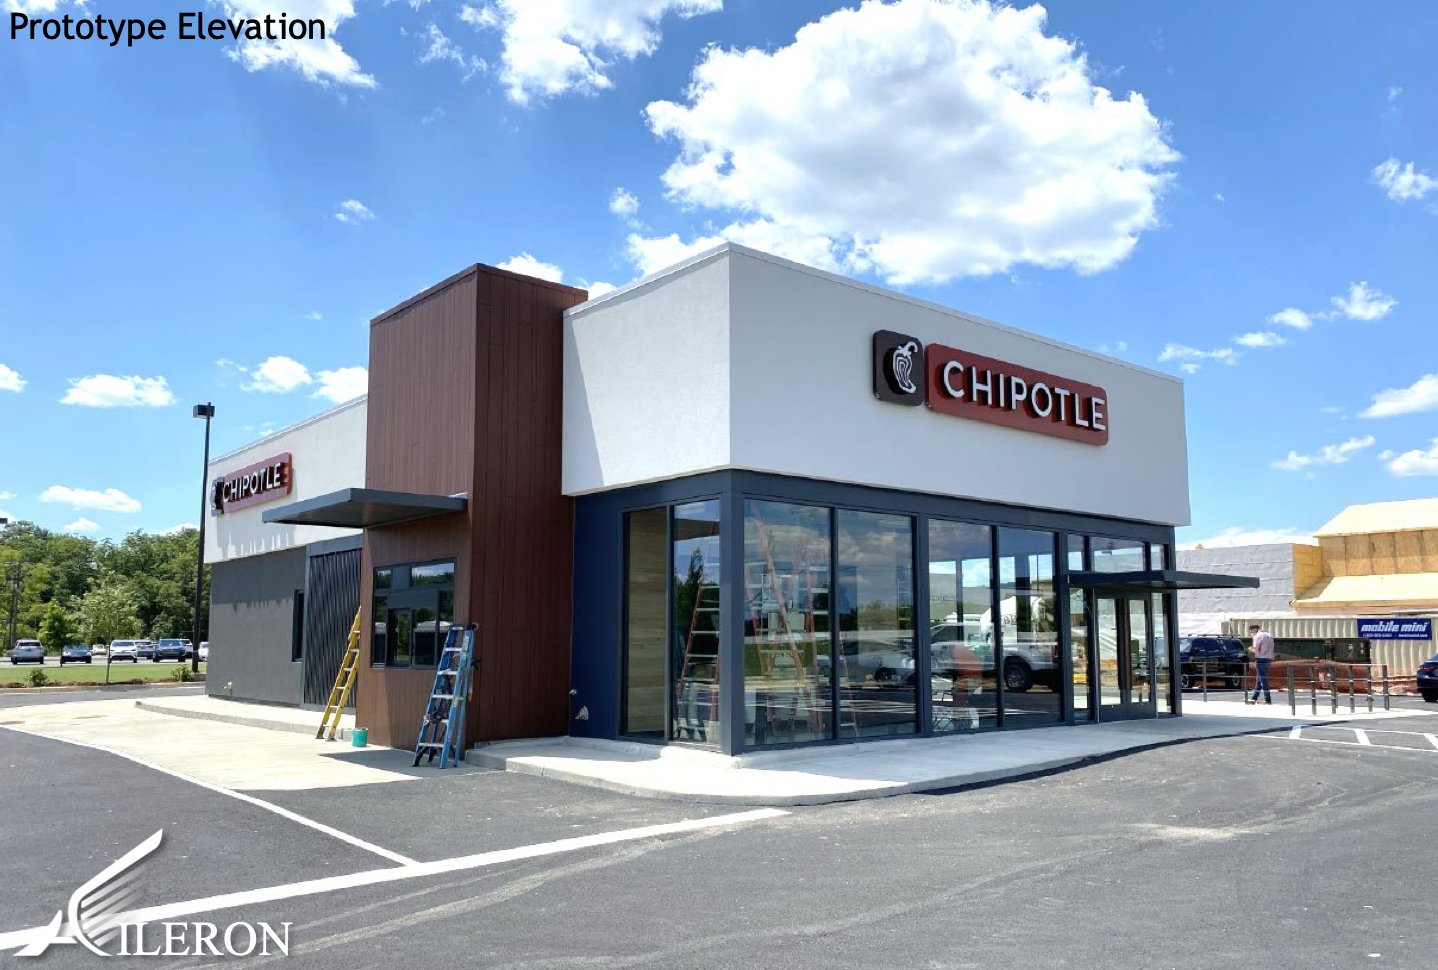 An exterior rendering shows what the Chipotle coming to E. County Line Road in Ridgeland will look like once built. One of the hottest fast-food chains in the country, this will be the first Chipotle in the metro area.